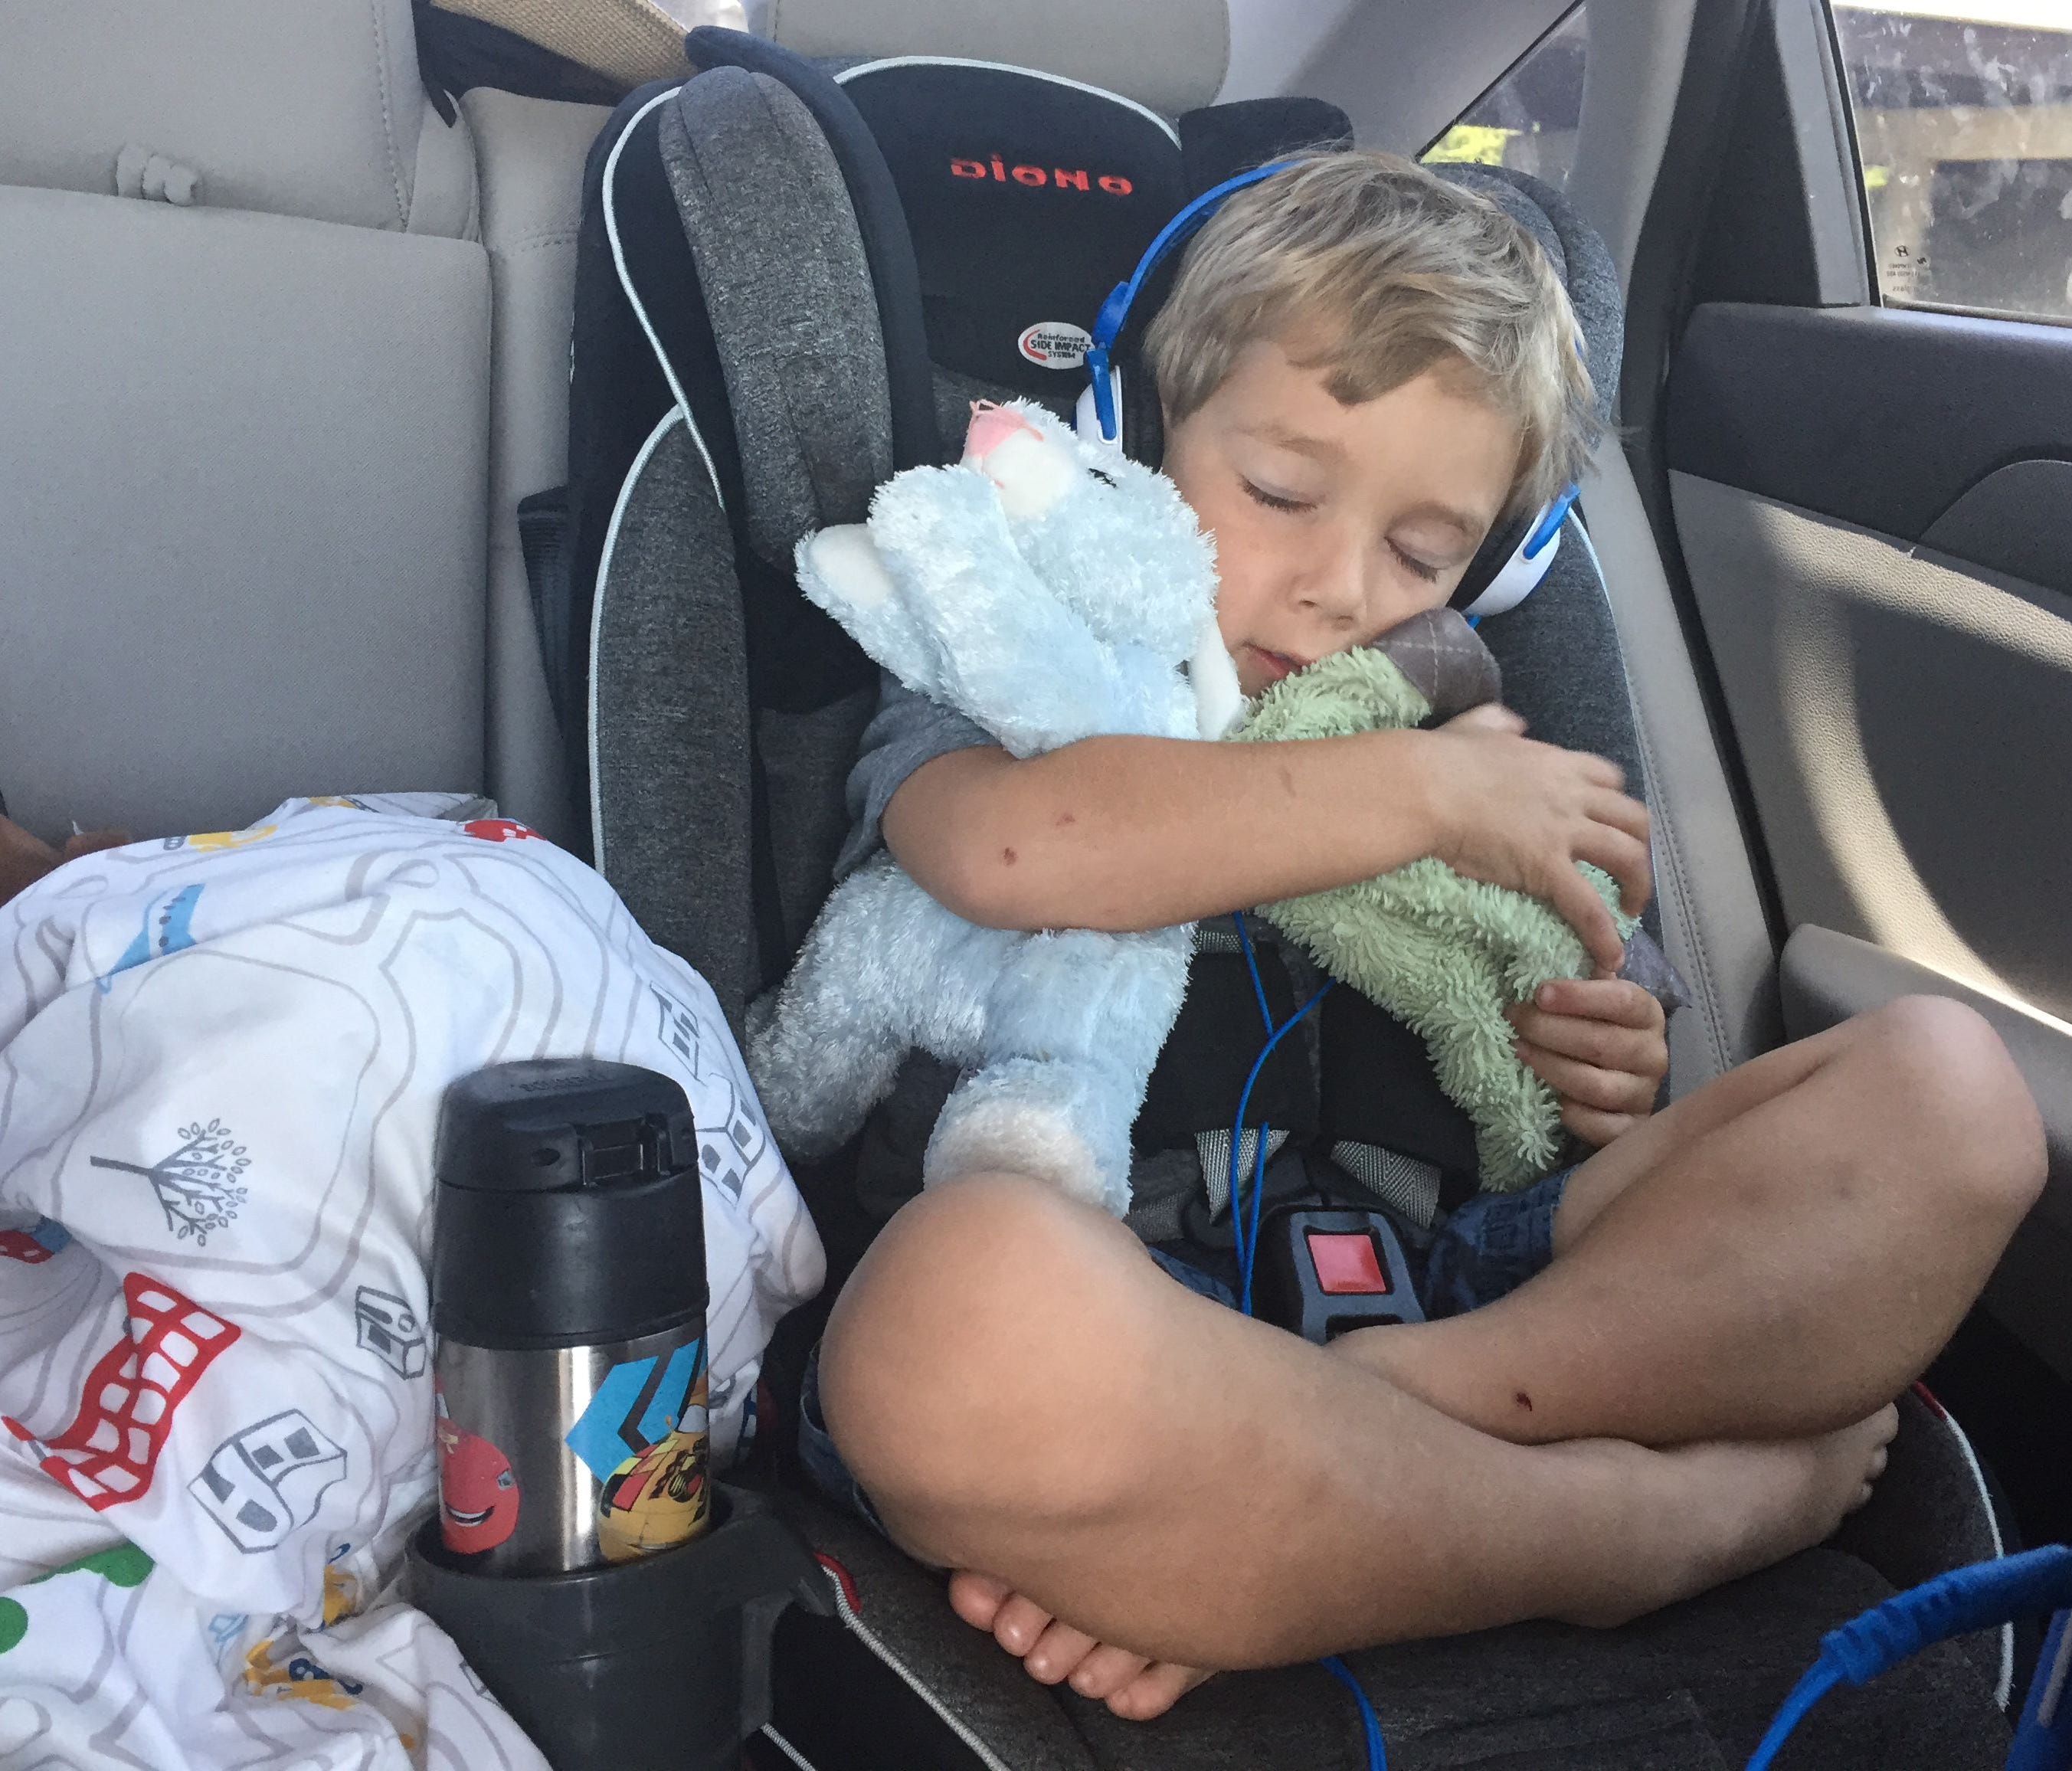 Having favorite stuffed animals and pillows in the car can make naps more comfortable.